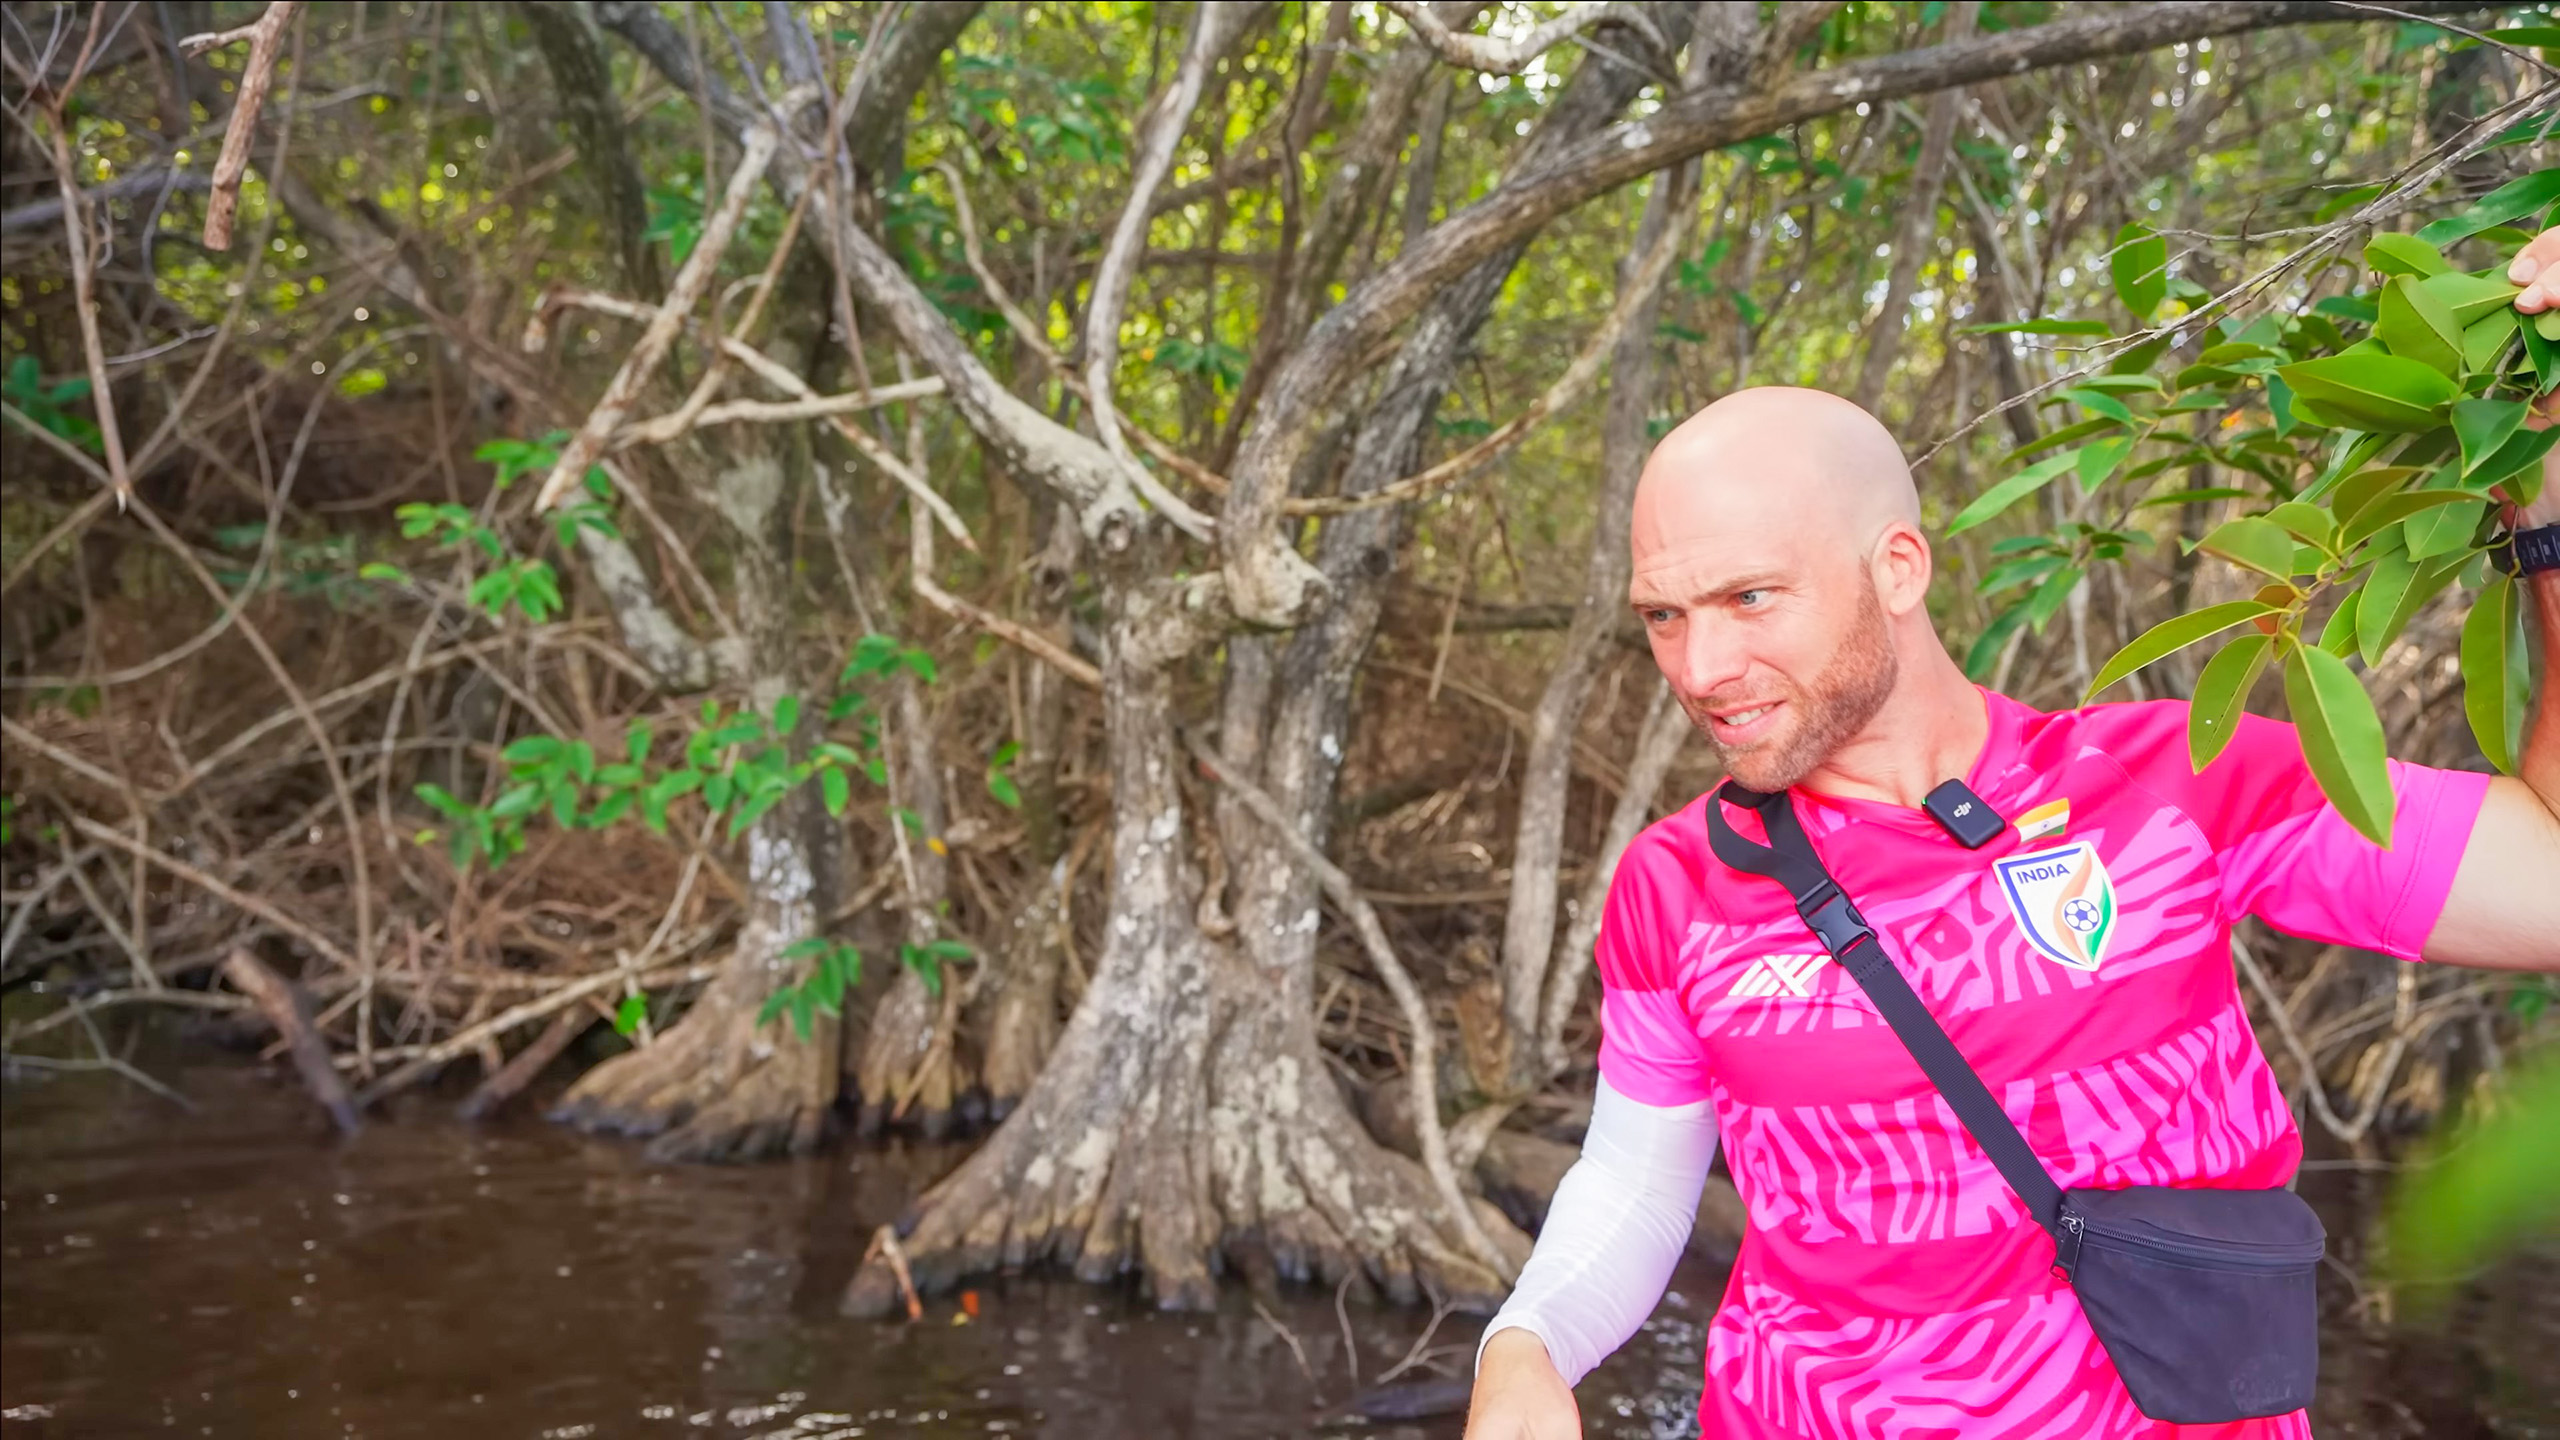 David Hoffmann hunts for giant crabs barefoot in a Dominican swamp | Davidsbeenhere